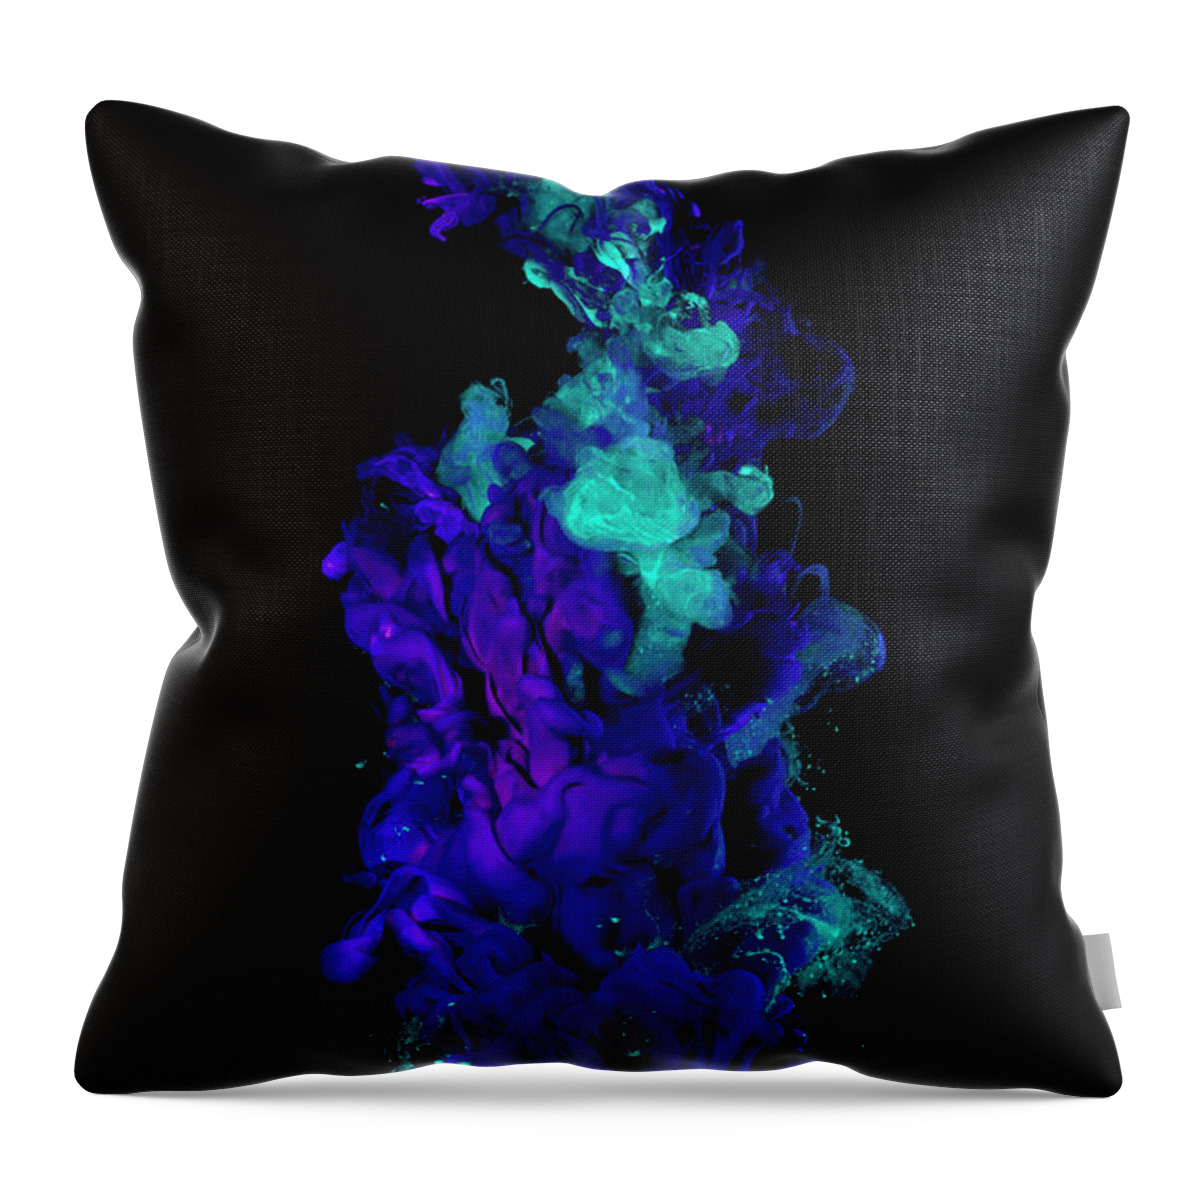 Mixing Throw Pillow featuring the photograph Blue And Green Paint In Water On Black by Biwa Studio